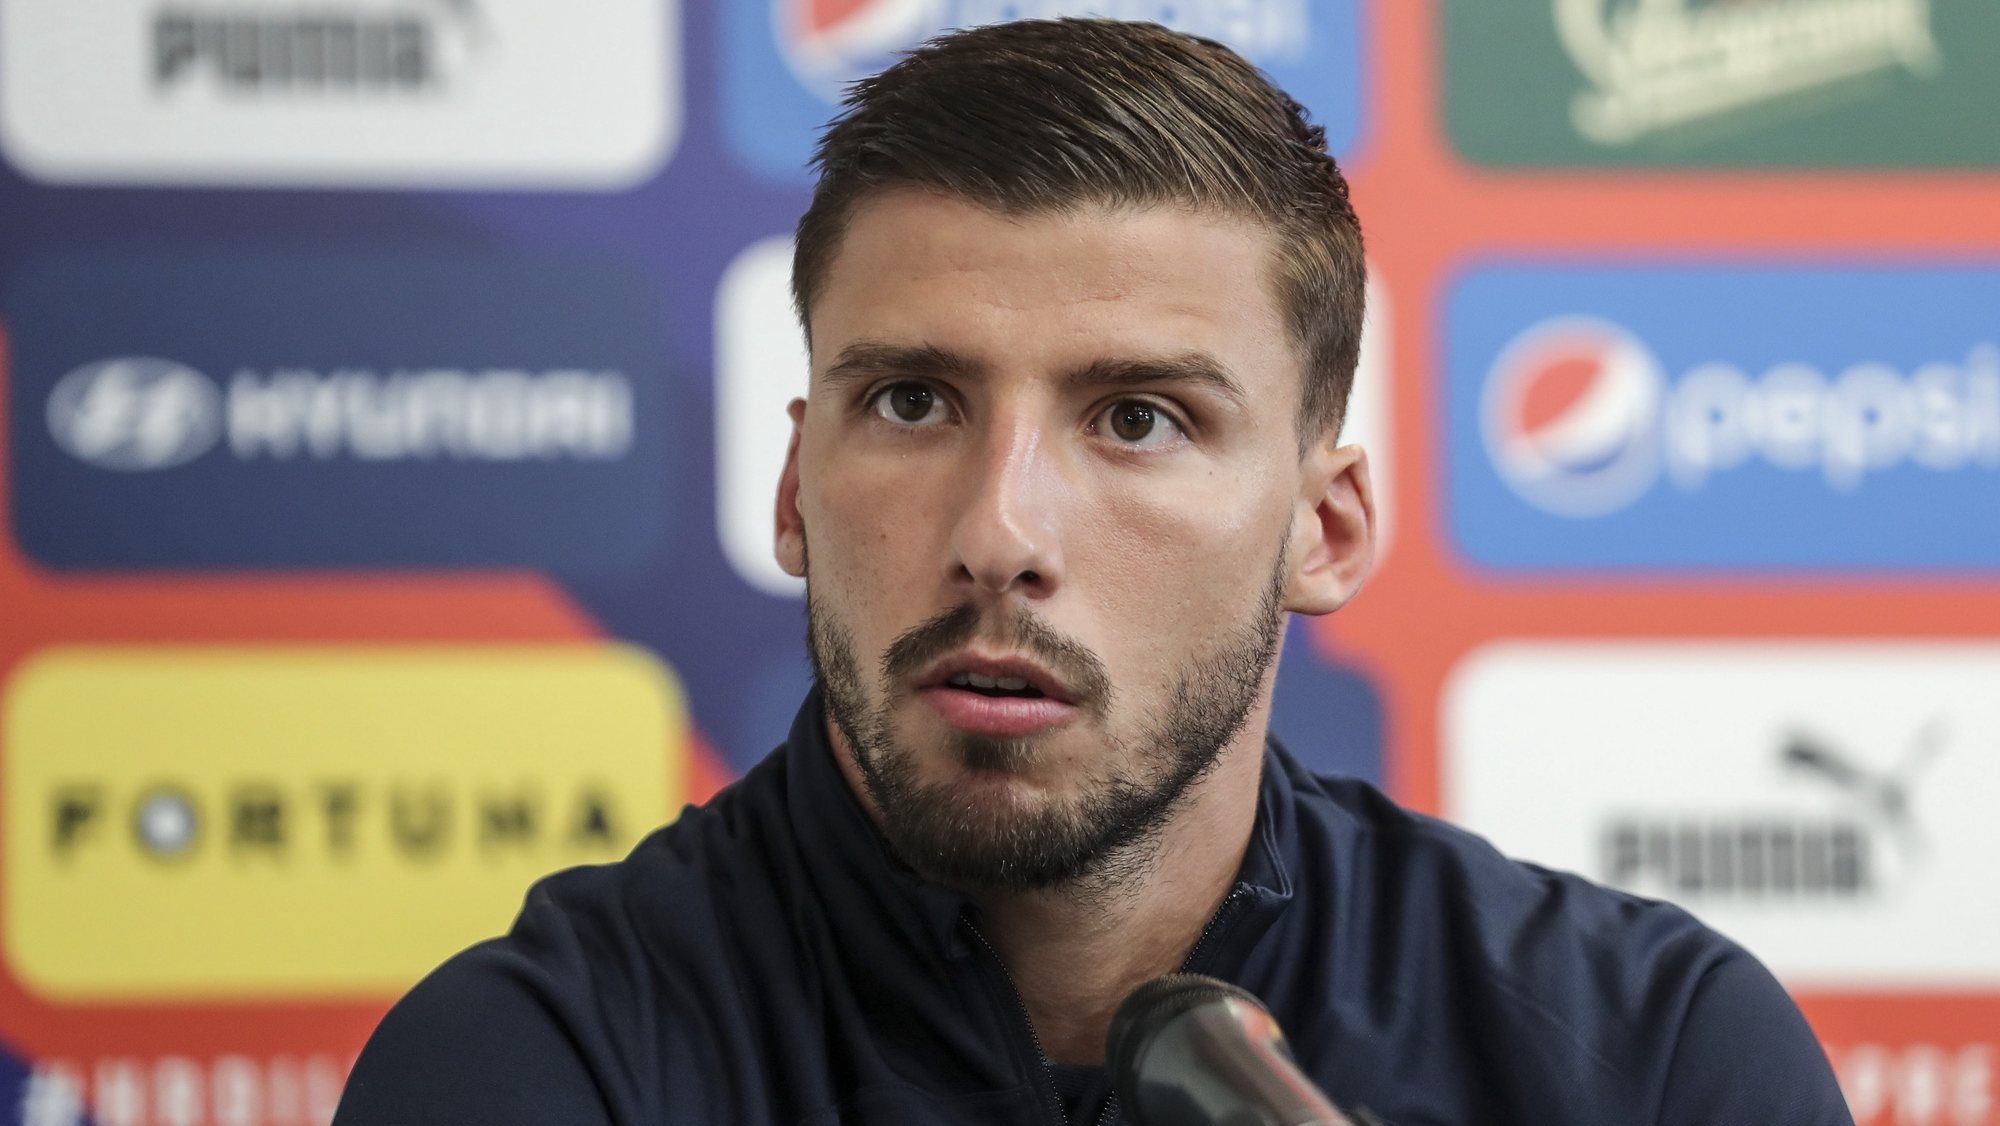 Portugal soccer player Ruben Dias speaks during the press conference prior to tomorrows UEFA Nations League soccer match against Czech Republic at Sinobo Stadium in Prague Czech Republic, 23 September 2022. MIGUEL A. LOPES/LUSA